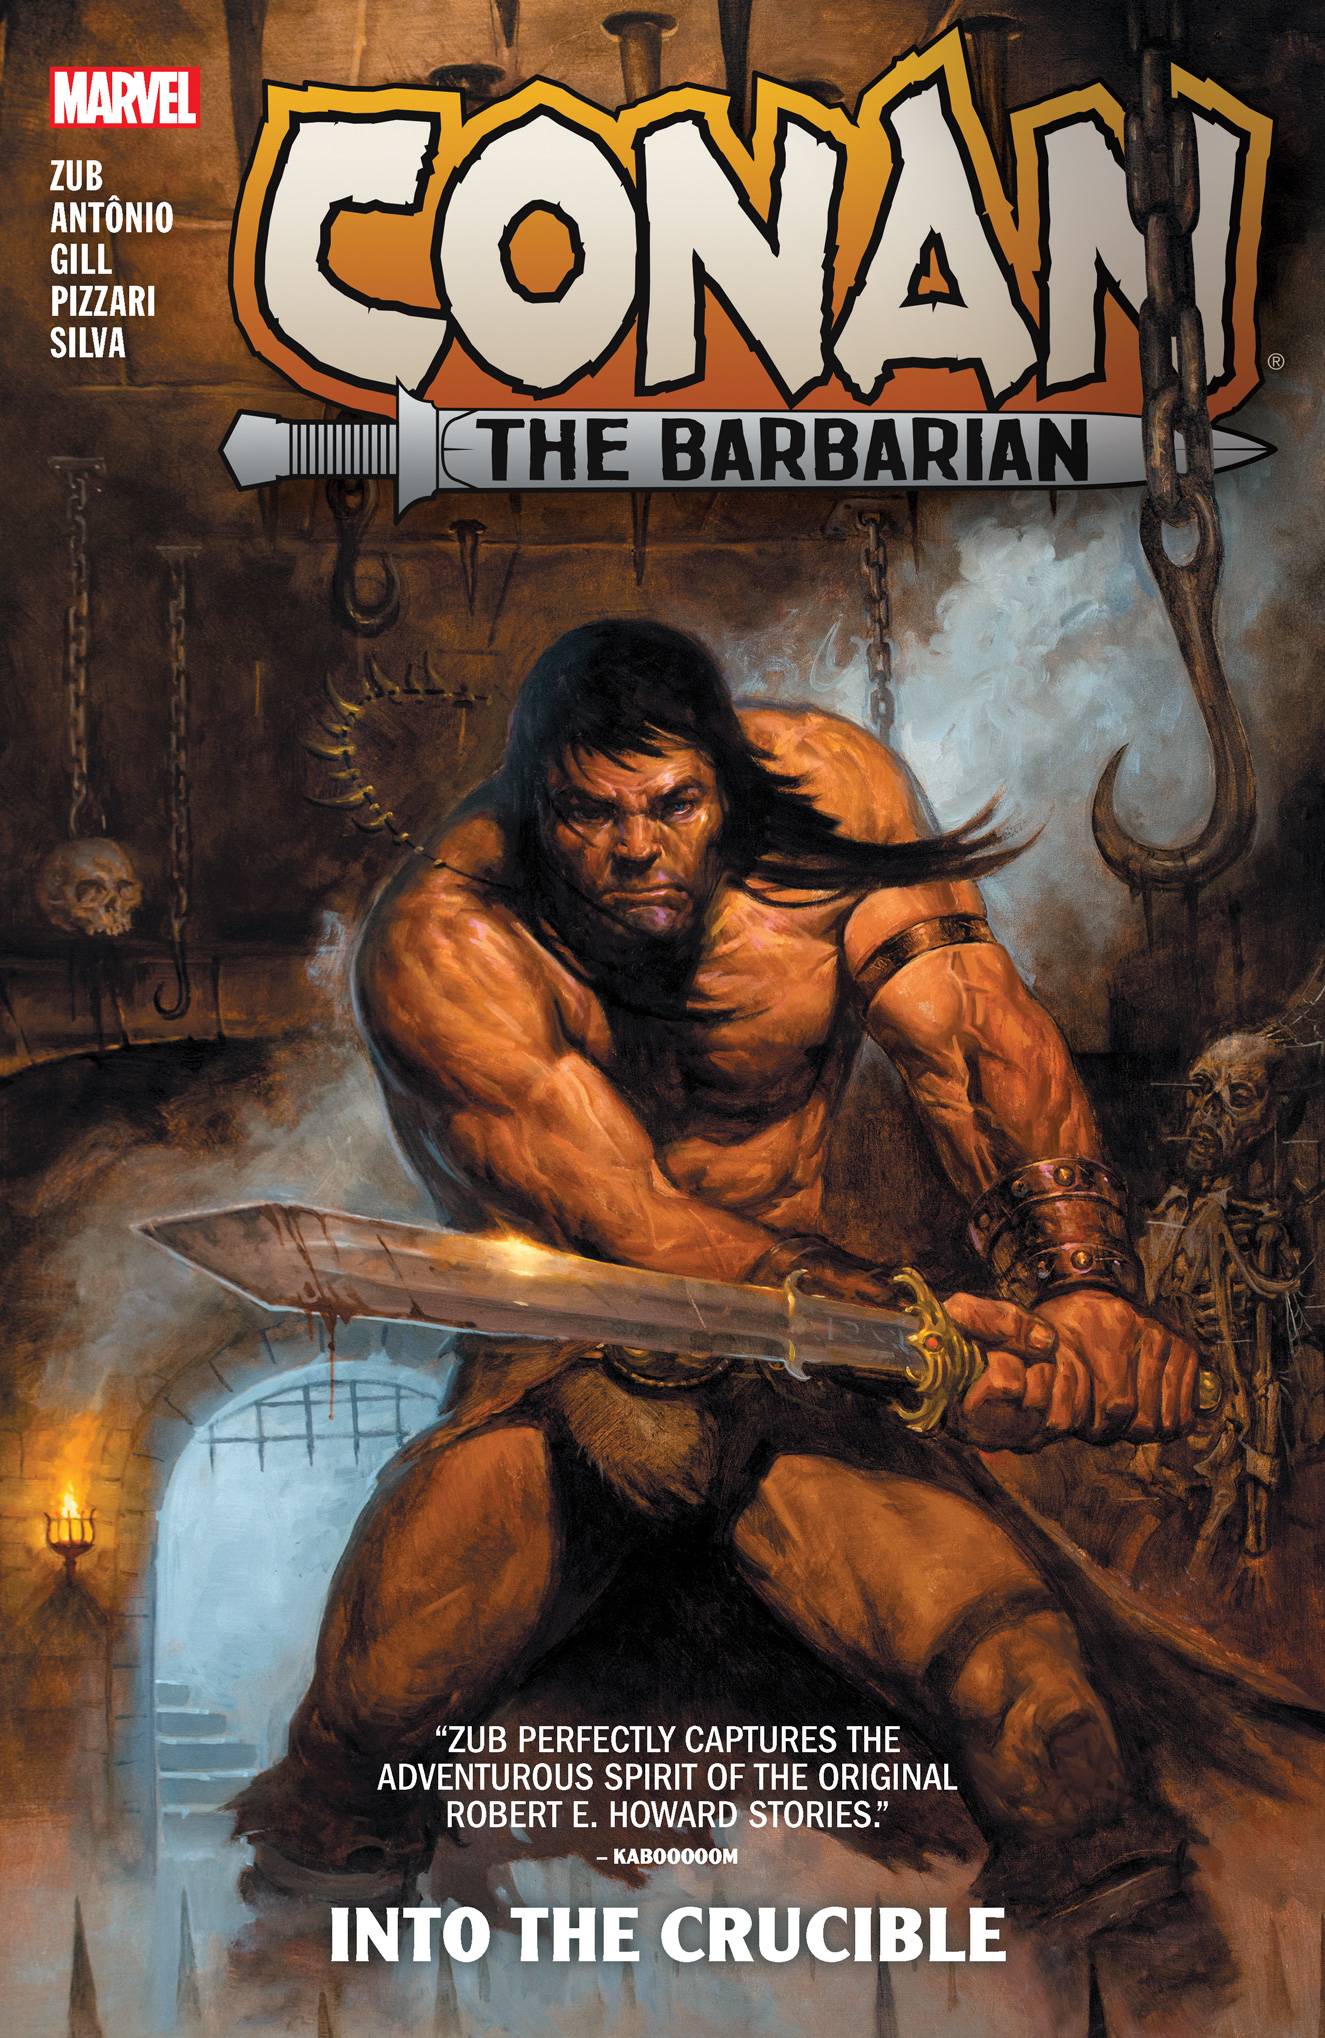 Conan the Barbarian by Jim Zub Graphic Novel Volume 3 Into The Crucible